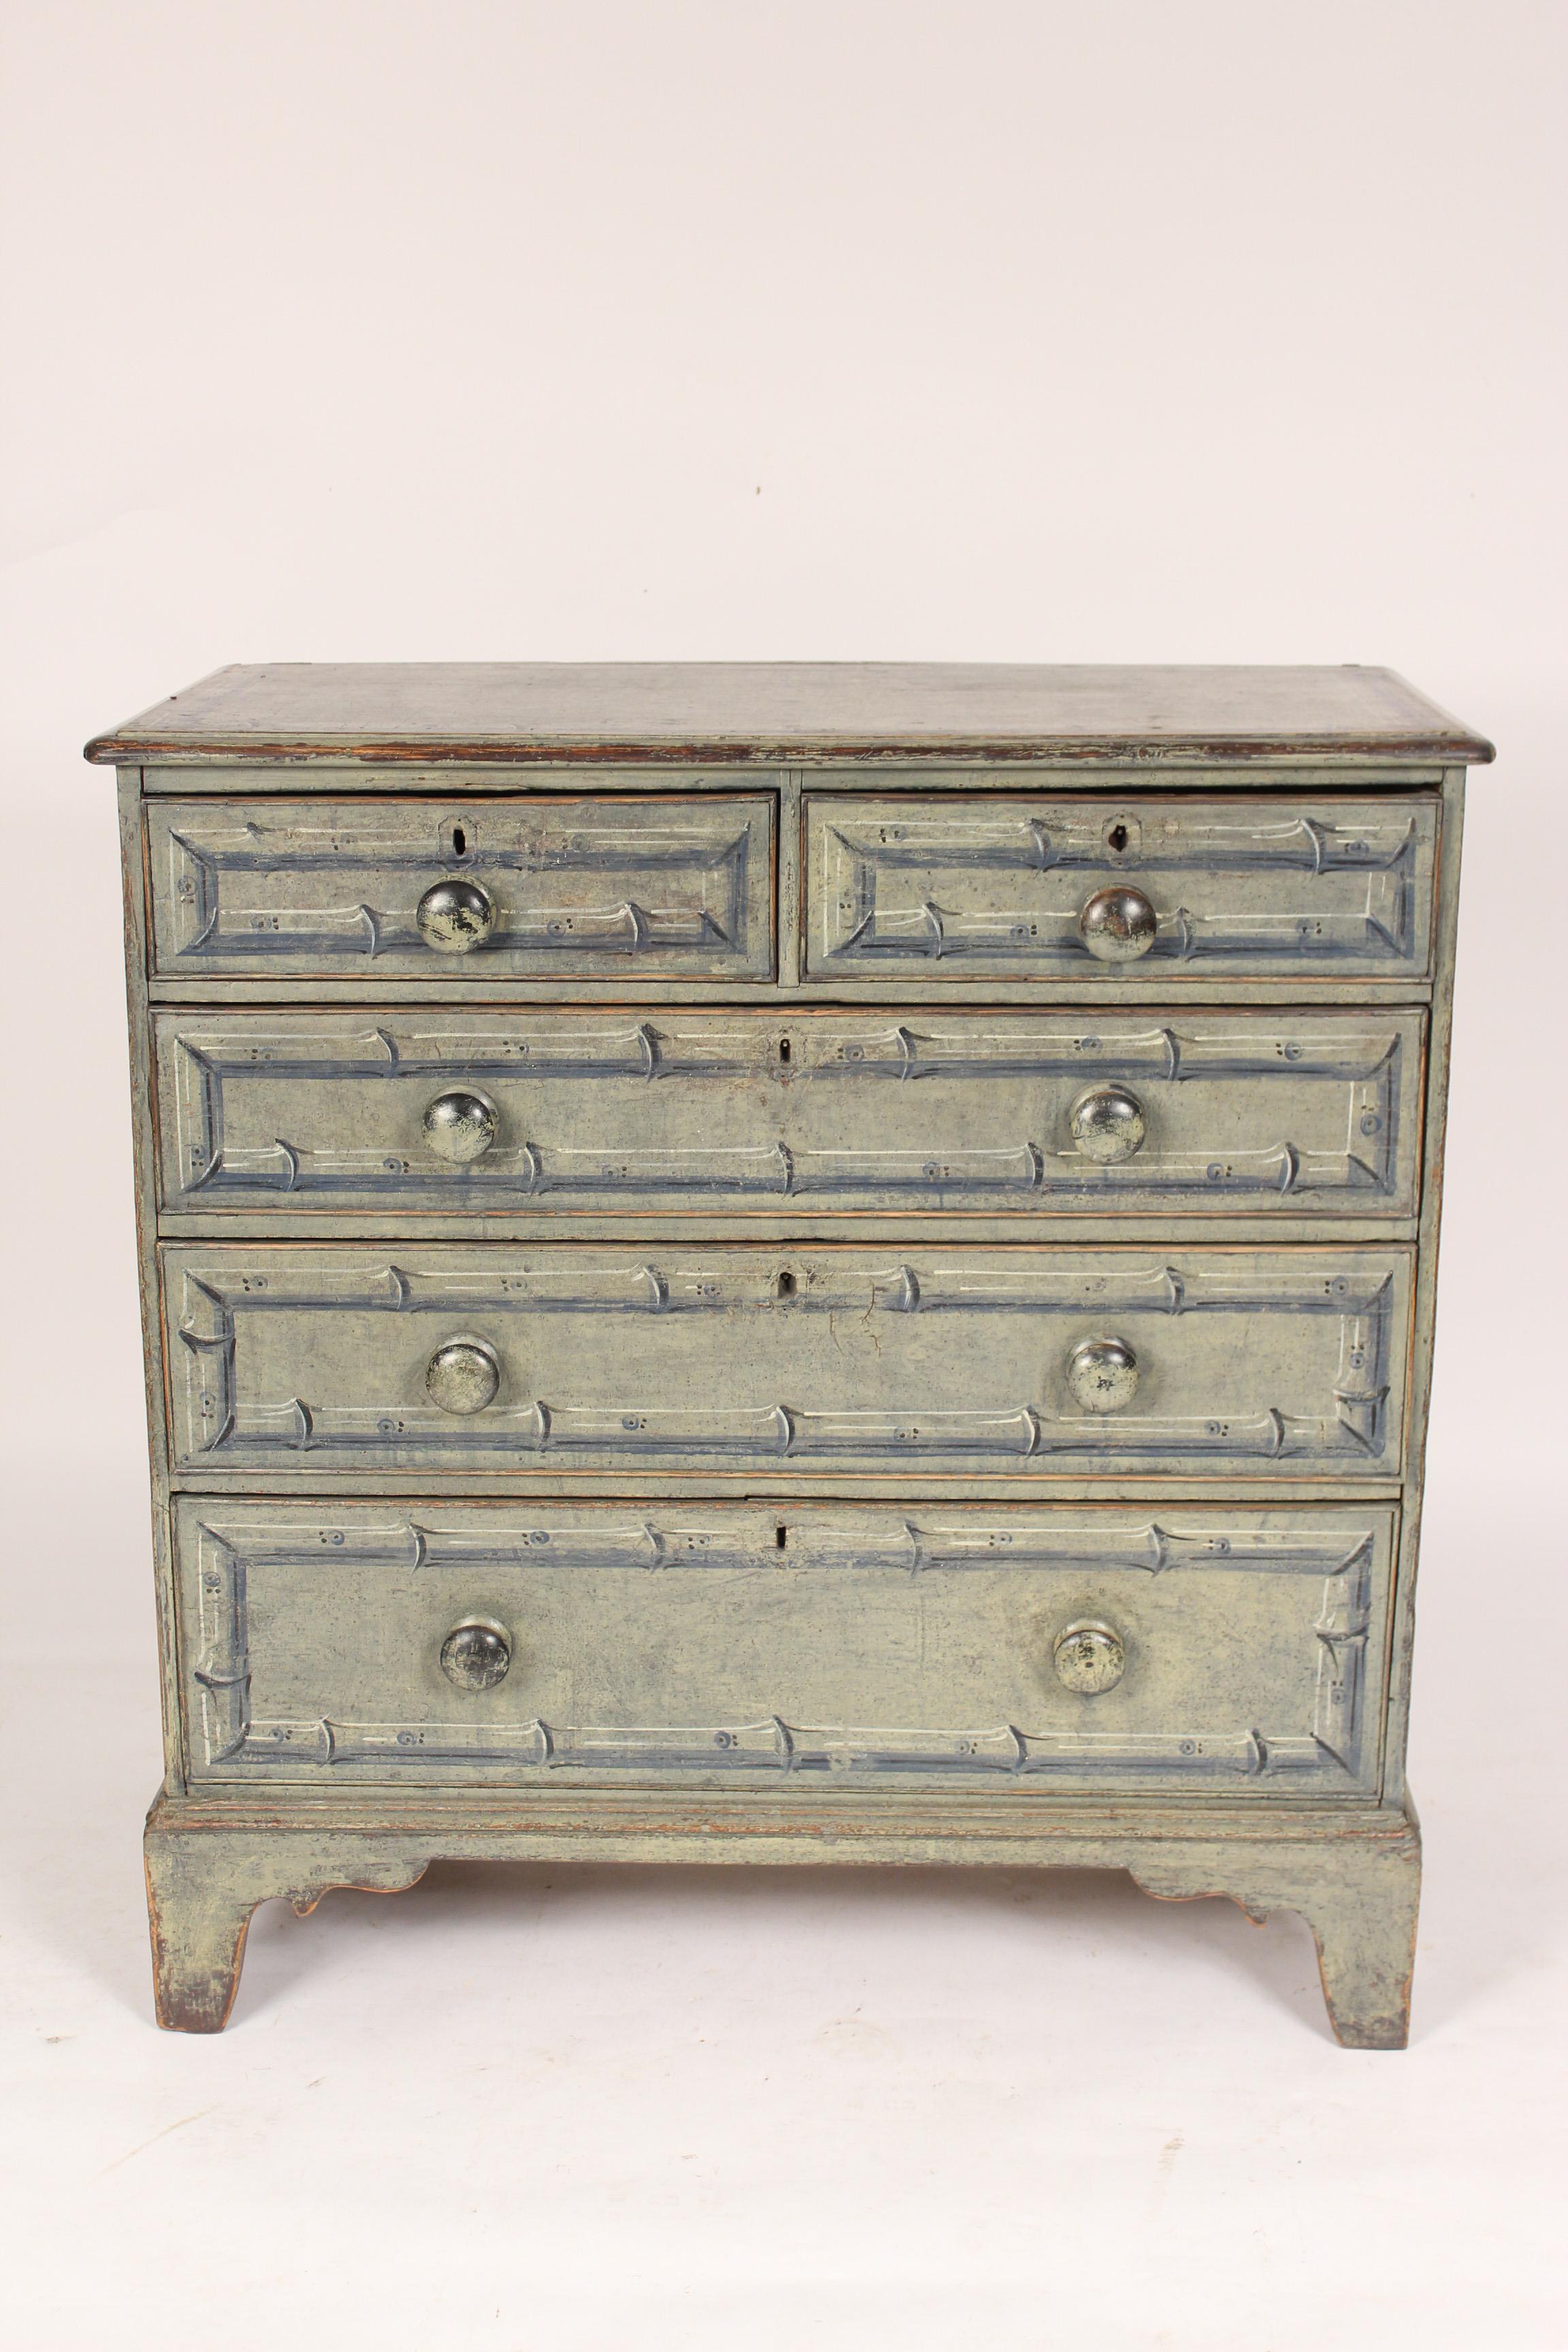 Antique English painted pine chest of drawers, 19th century. Paint is old and most likely original.